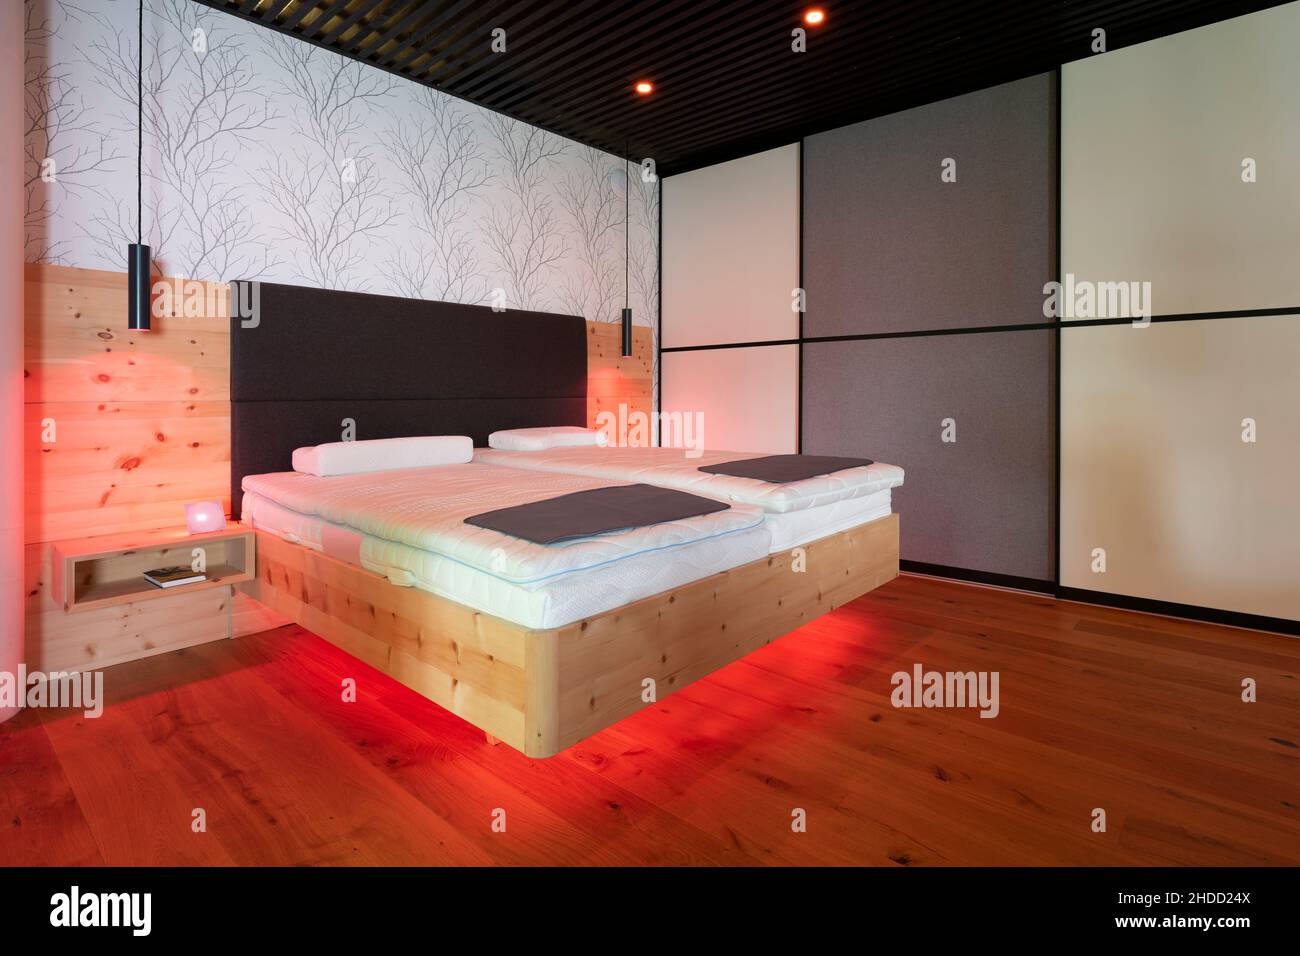 modern stone pine bed with led lighting, hanging lamps and black slatted ceiling Stock Photo